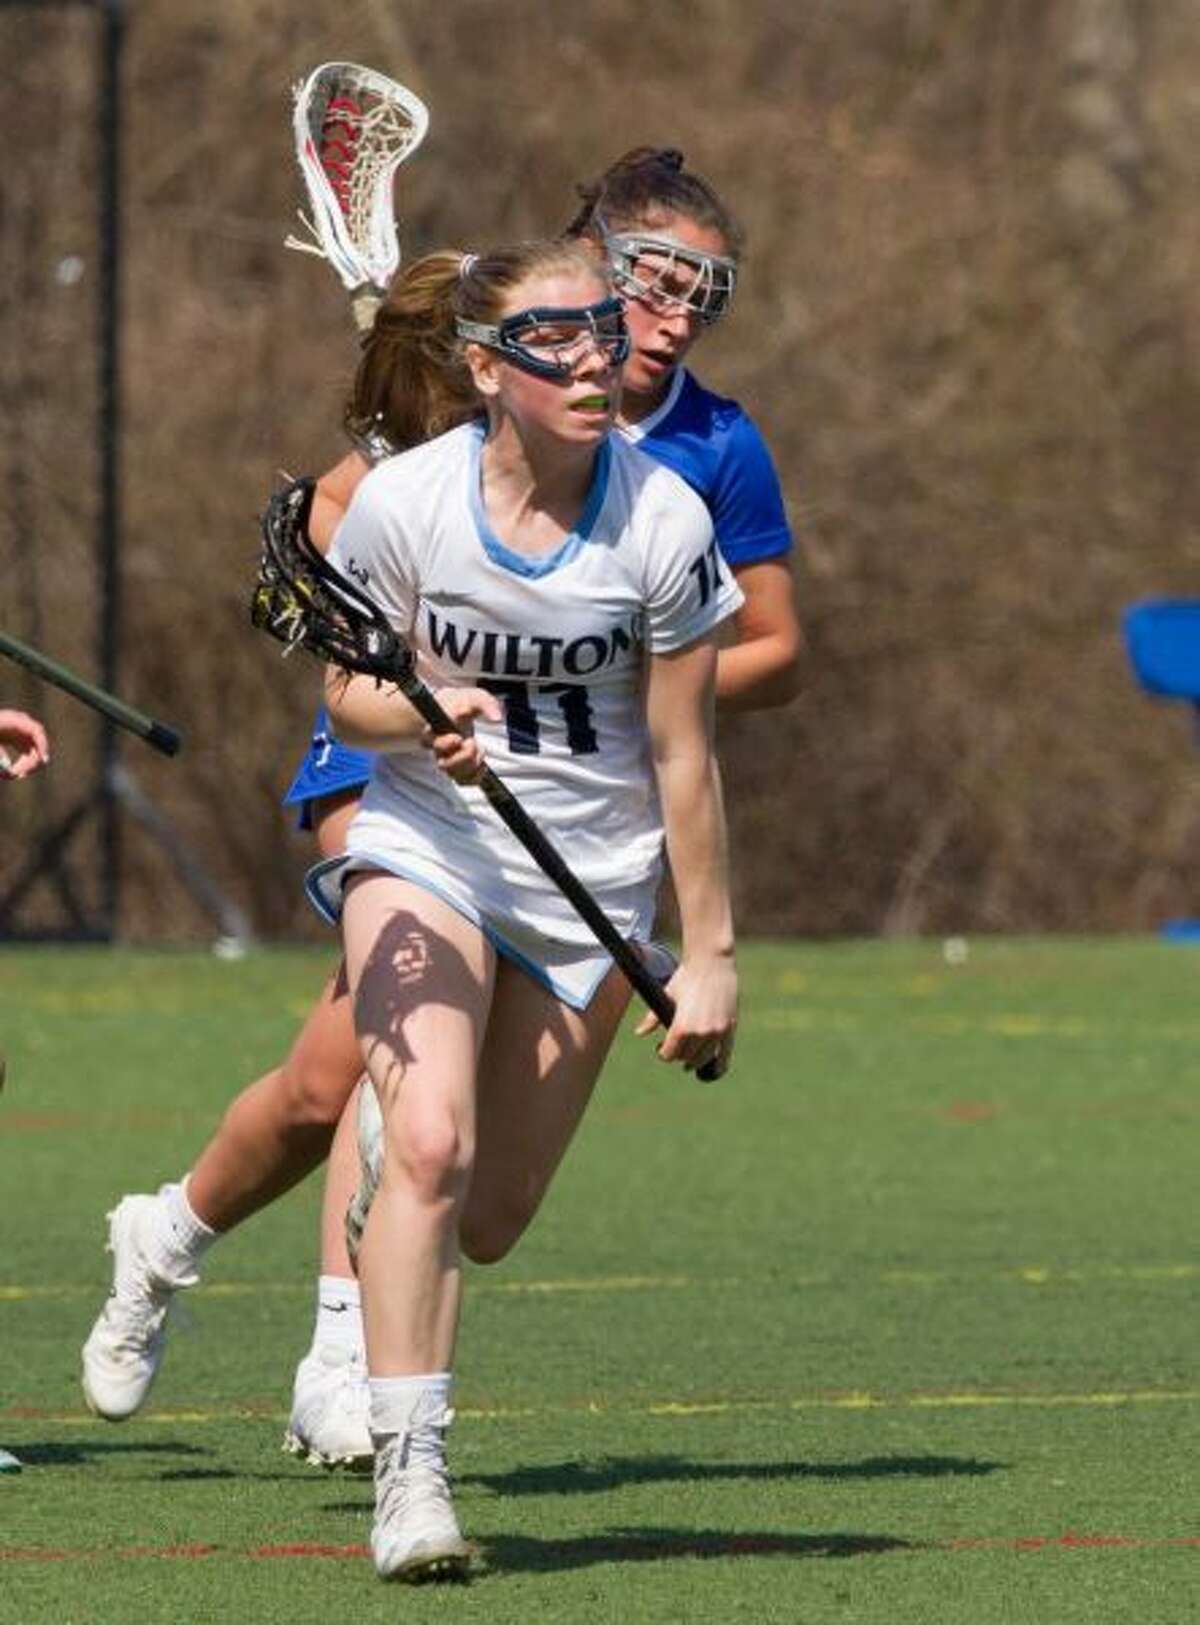 Olivia Gladstein and the Wilton girls lacrosse team will host Fairfield Warde on Friday in the FCIAC quarterfinals. — GretchenMcMahonPhotography.com